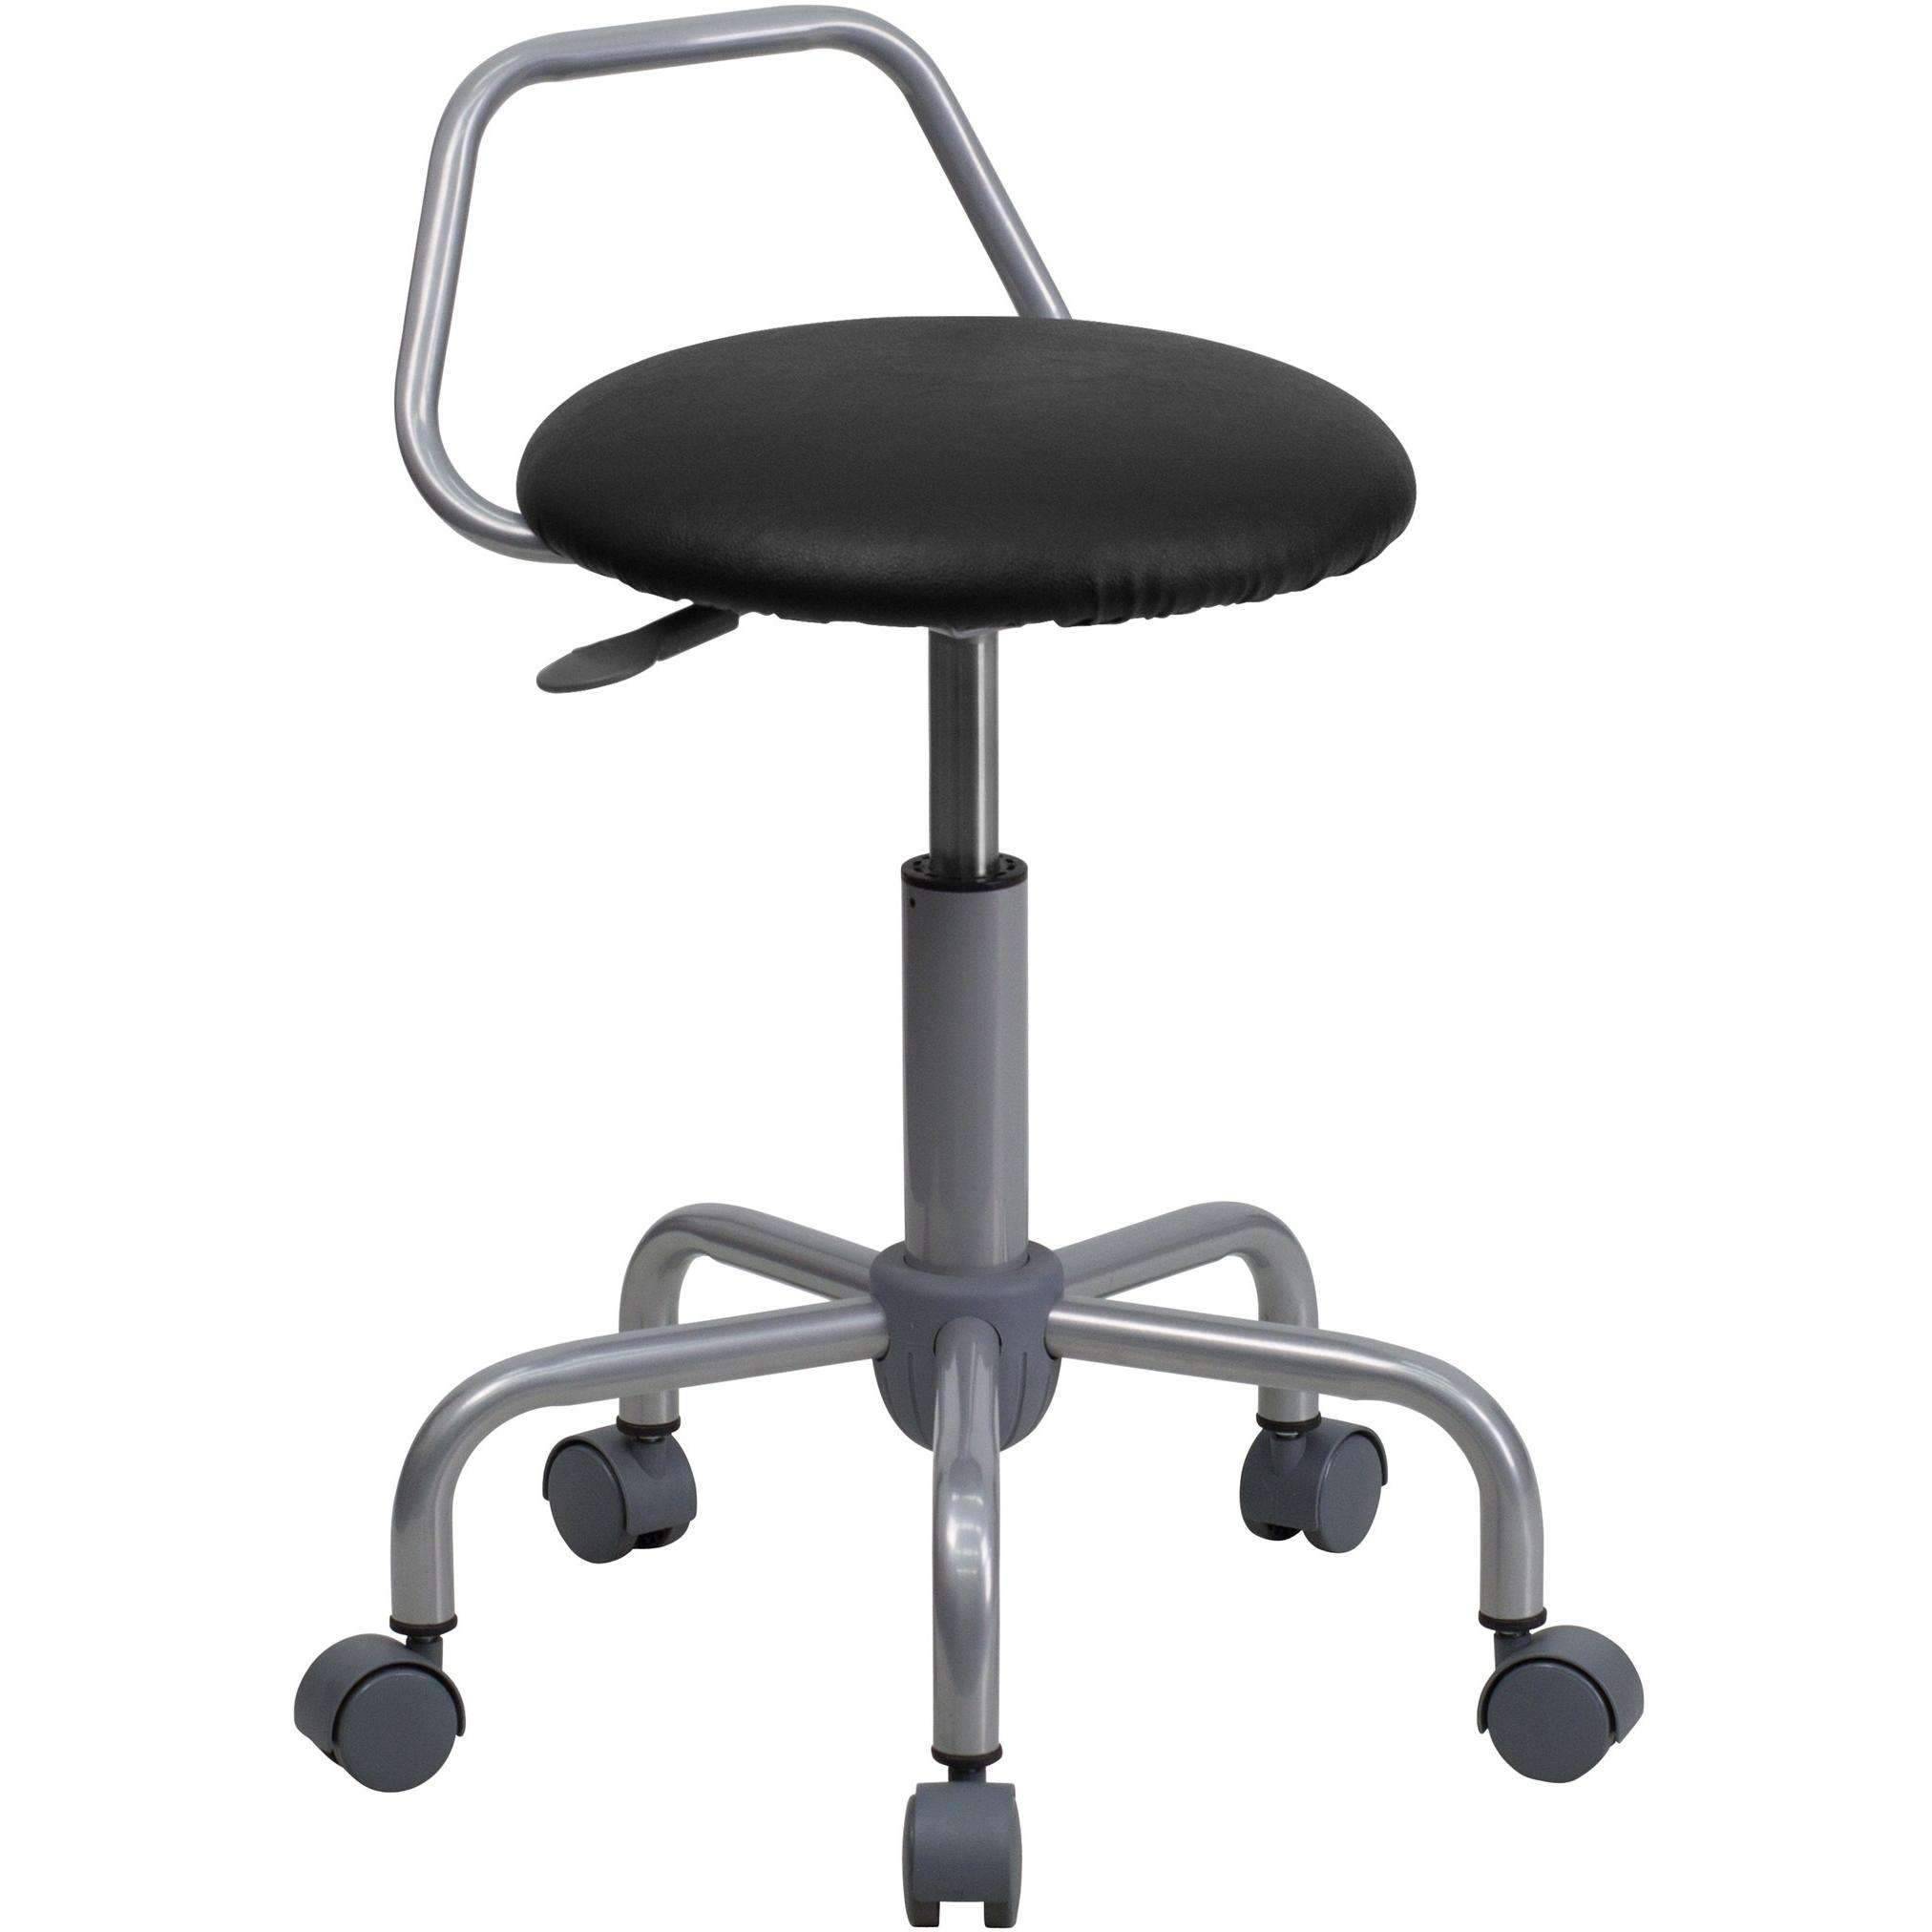 Sit Healthier Ergonomic Surgeon Chair with Footrest for Precision Surgical and Dental Work